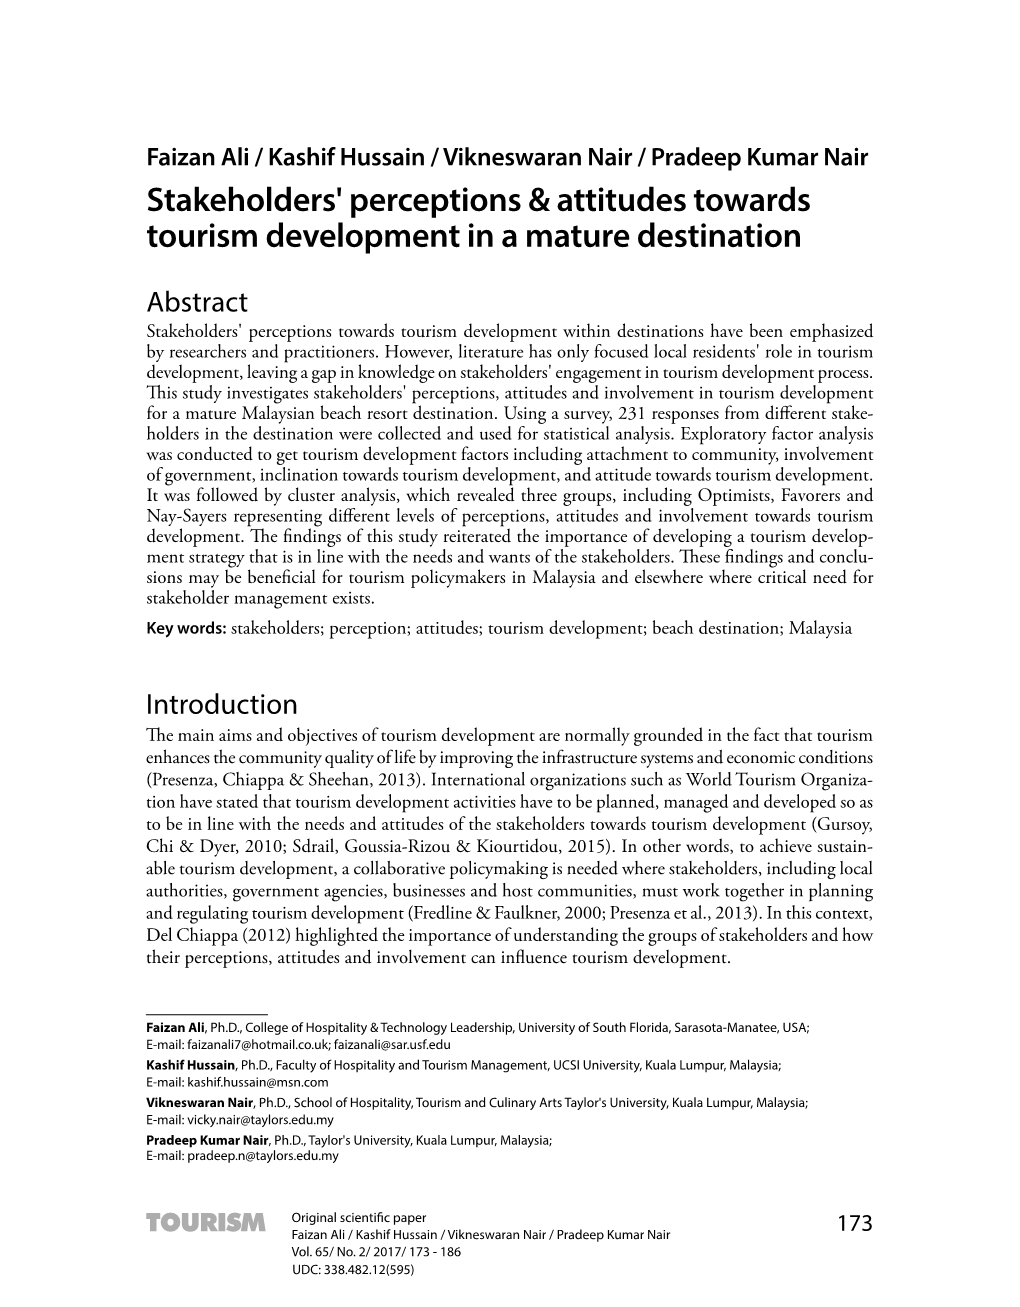 Stakeholders' Perceptions & Attitudes Towards Tourism Development in A